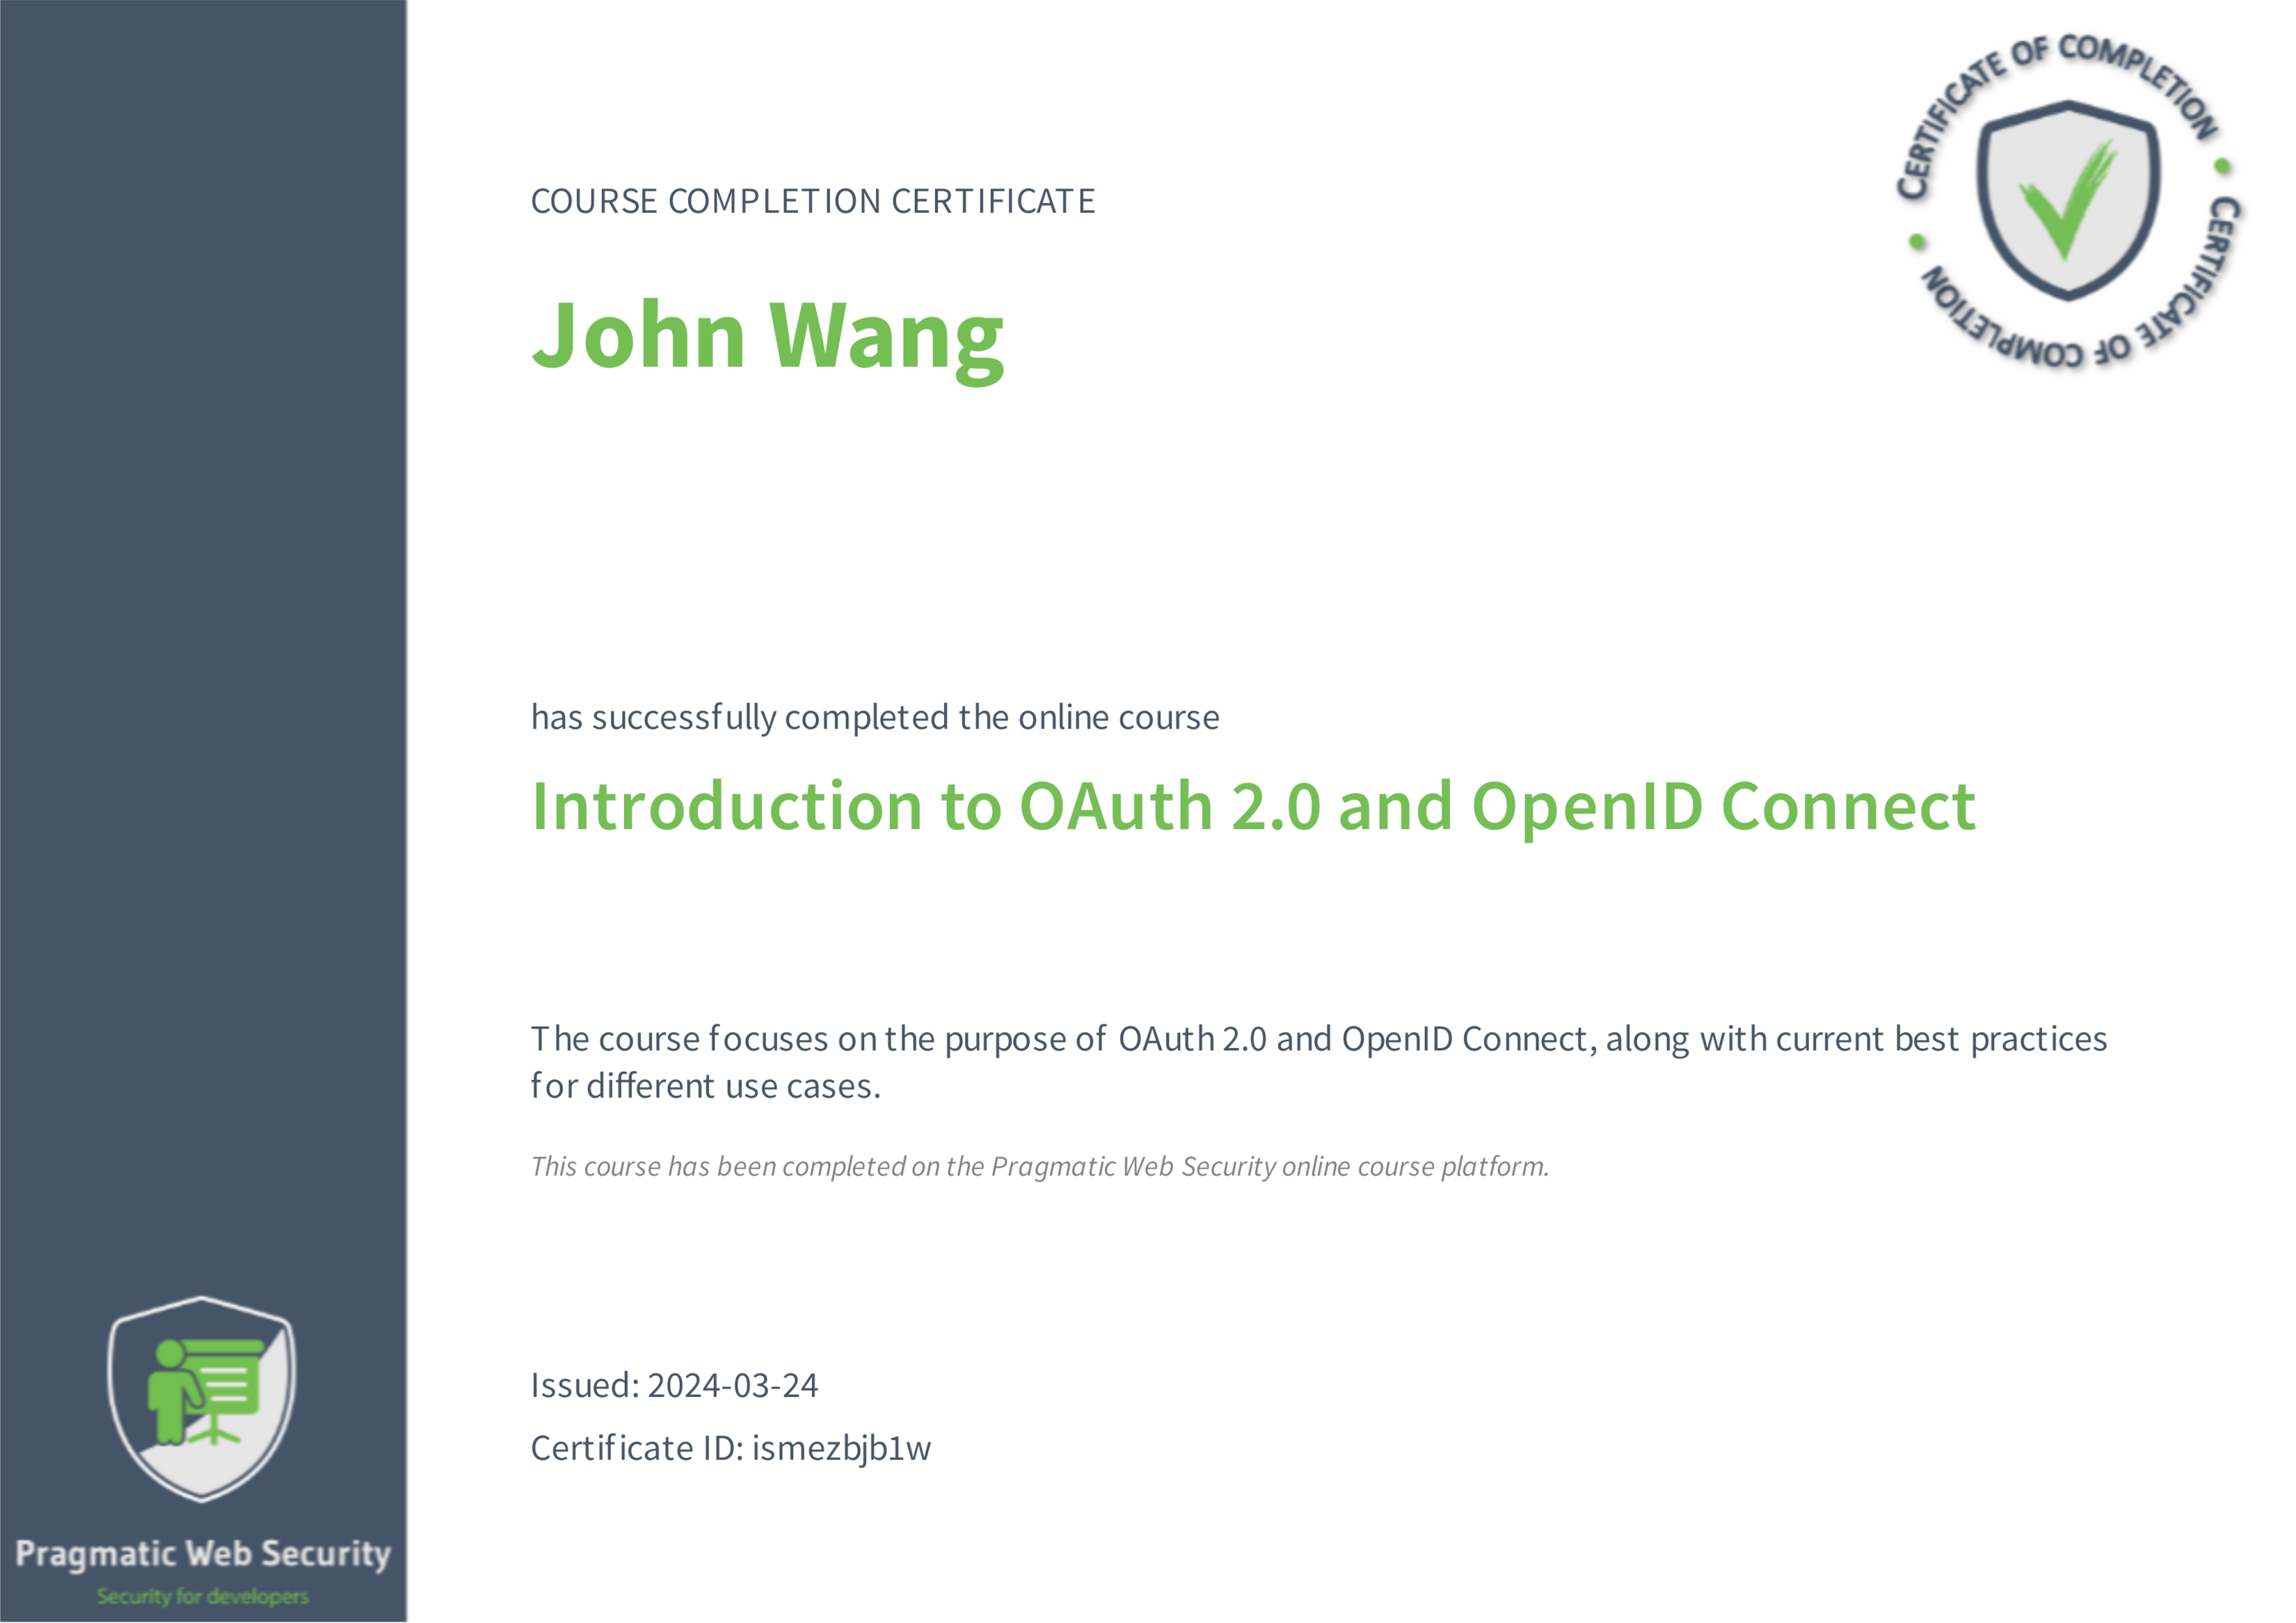 John's Introduction to OAuth 2.0 and OpenID Connect from Pragmatic Web Security by Dr. Philippe De Ryck